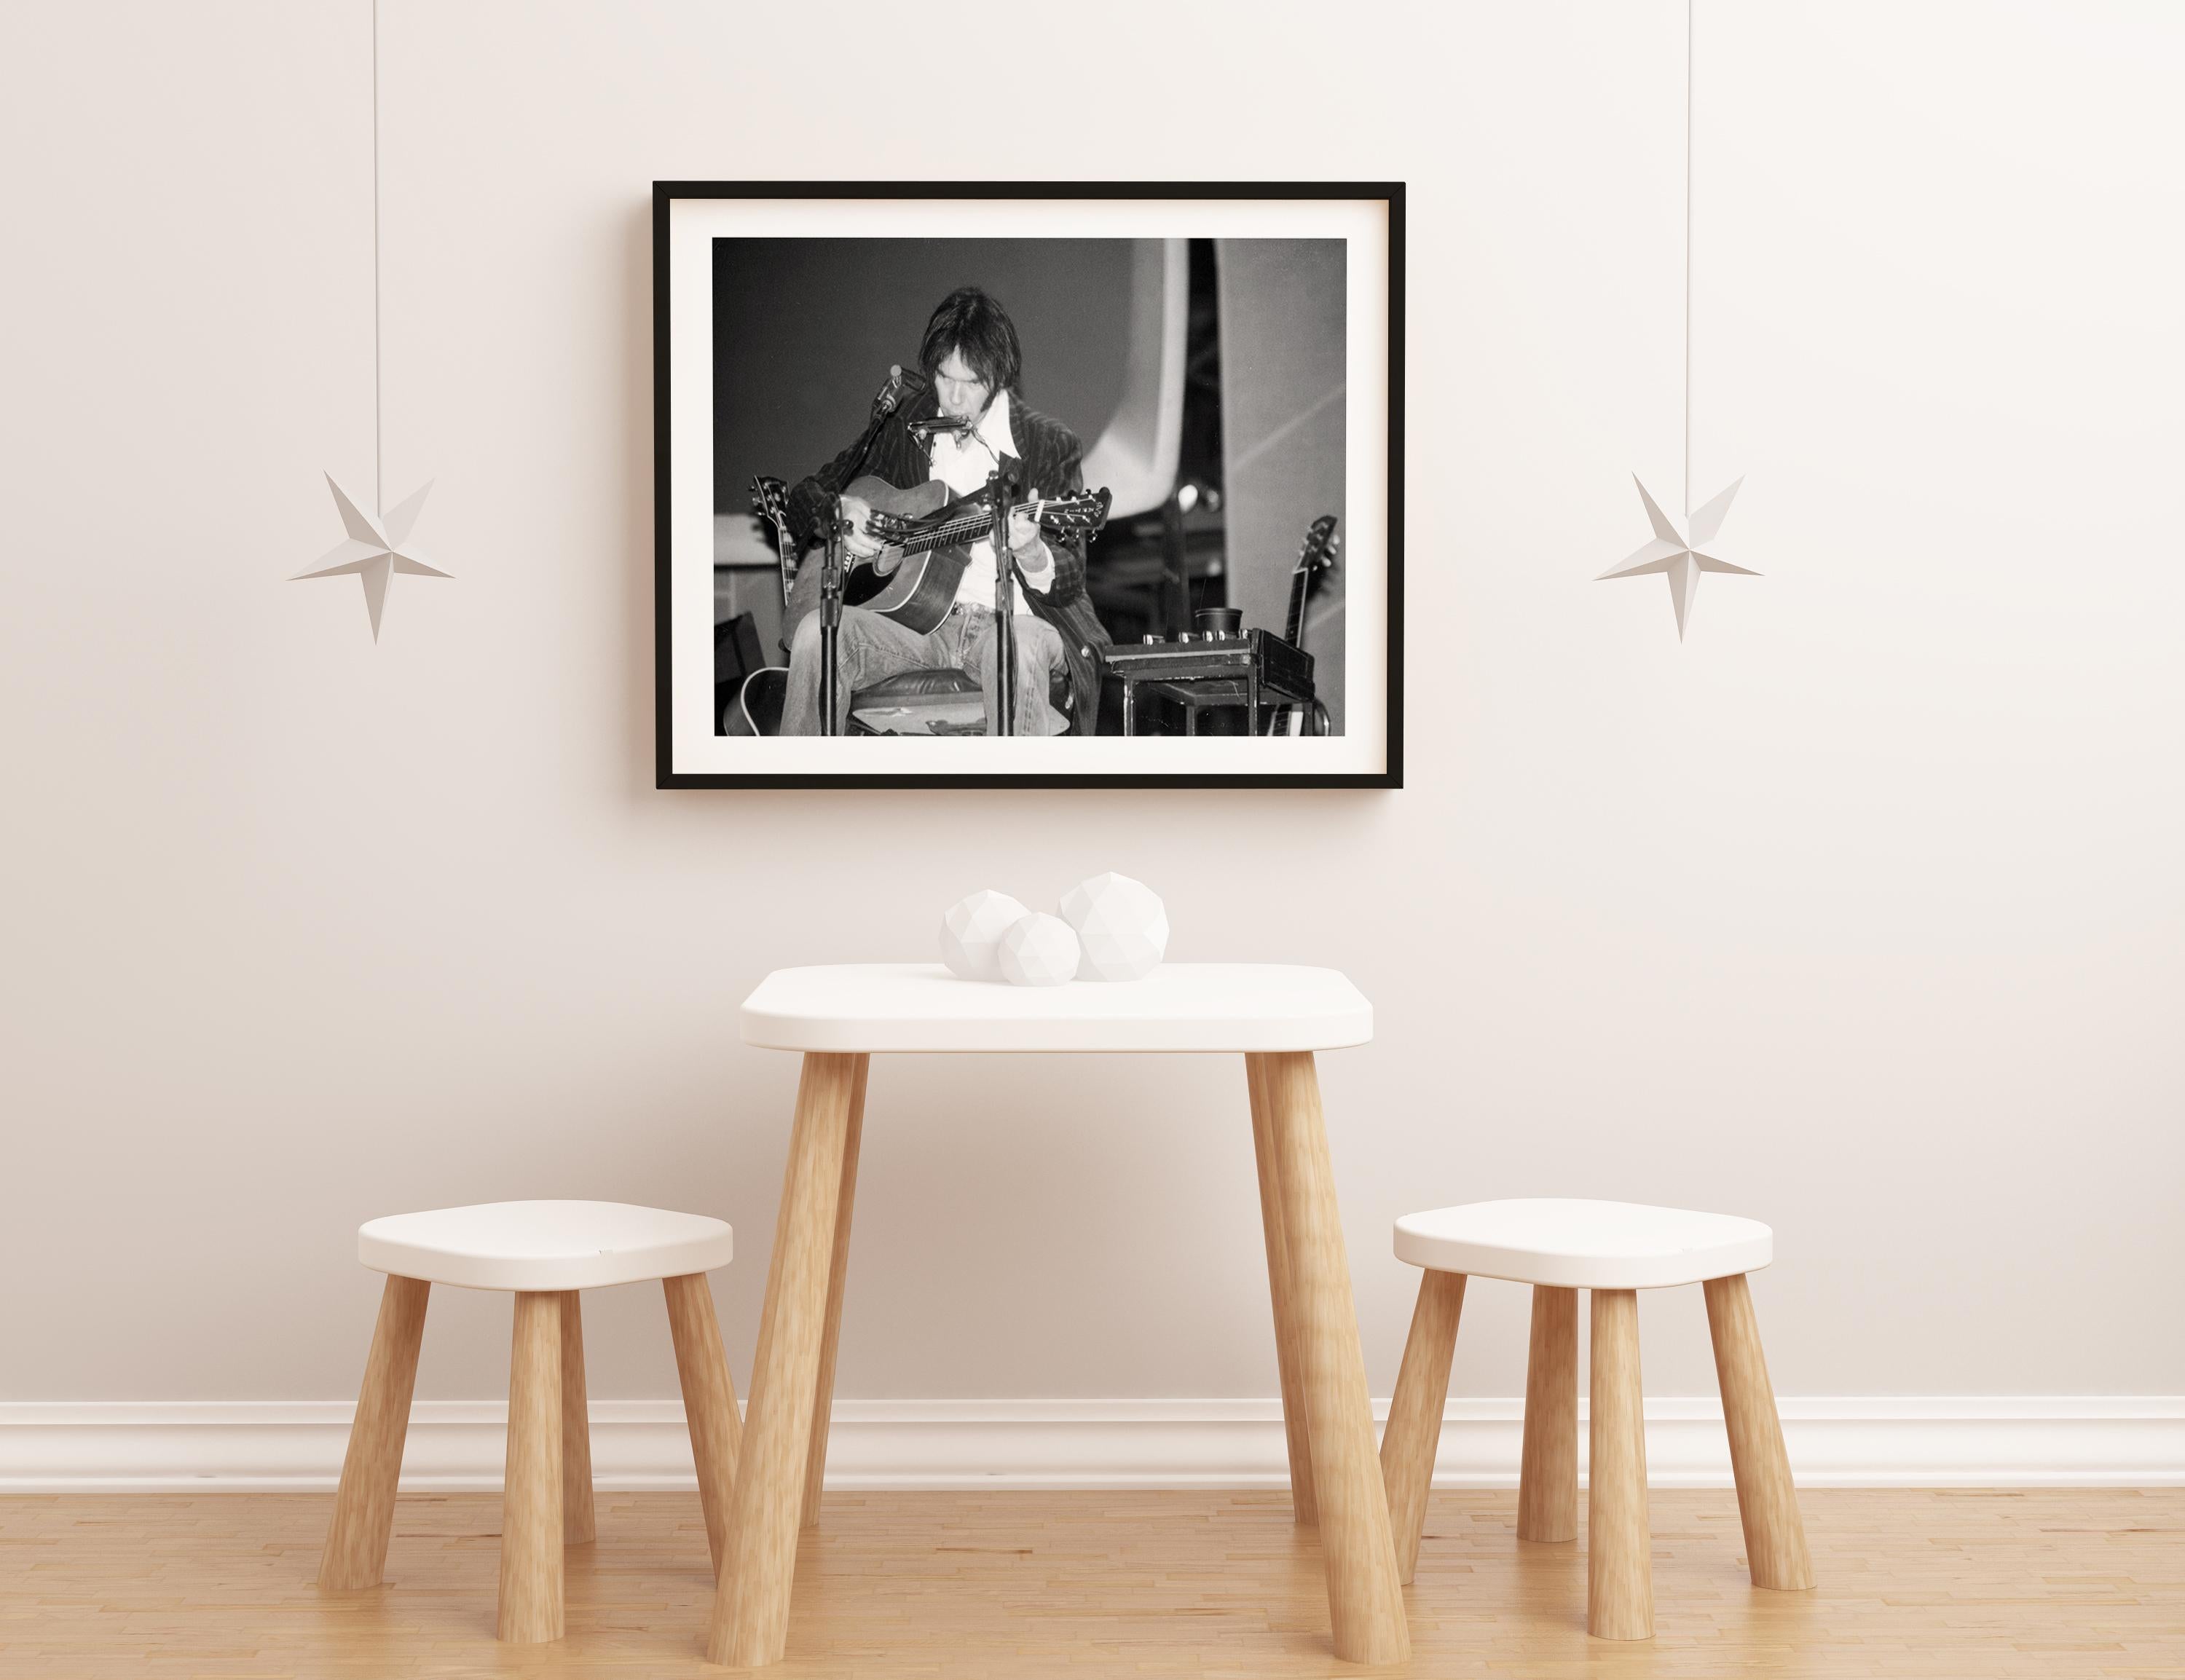 Neil Young Playing Guitar and Harmonica on Stage Fine Art Print - Black Portrait Photograph by David Plastik